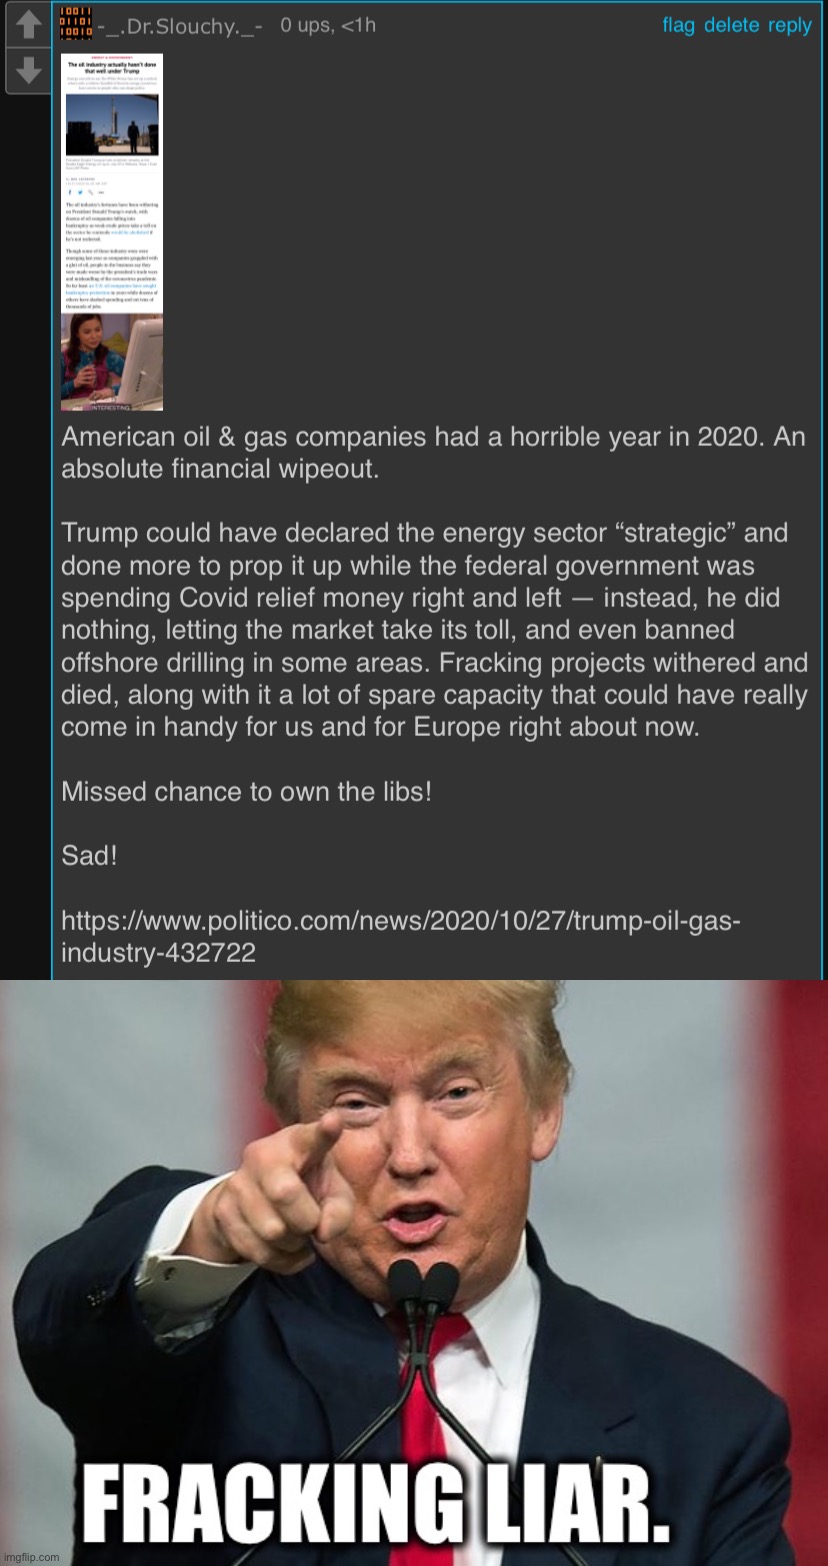 Tl;dr Donald Trump is a fracking liar. Sad! | image tagged in dr slouchy roast trump oil industry,fracking hilarious,fracking,oil,gas,donald trump | made w/ Imgflip meme maker